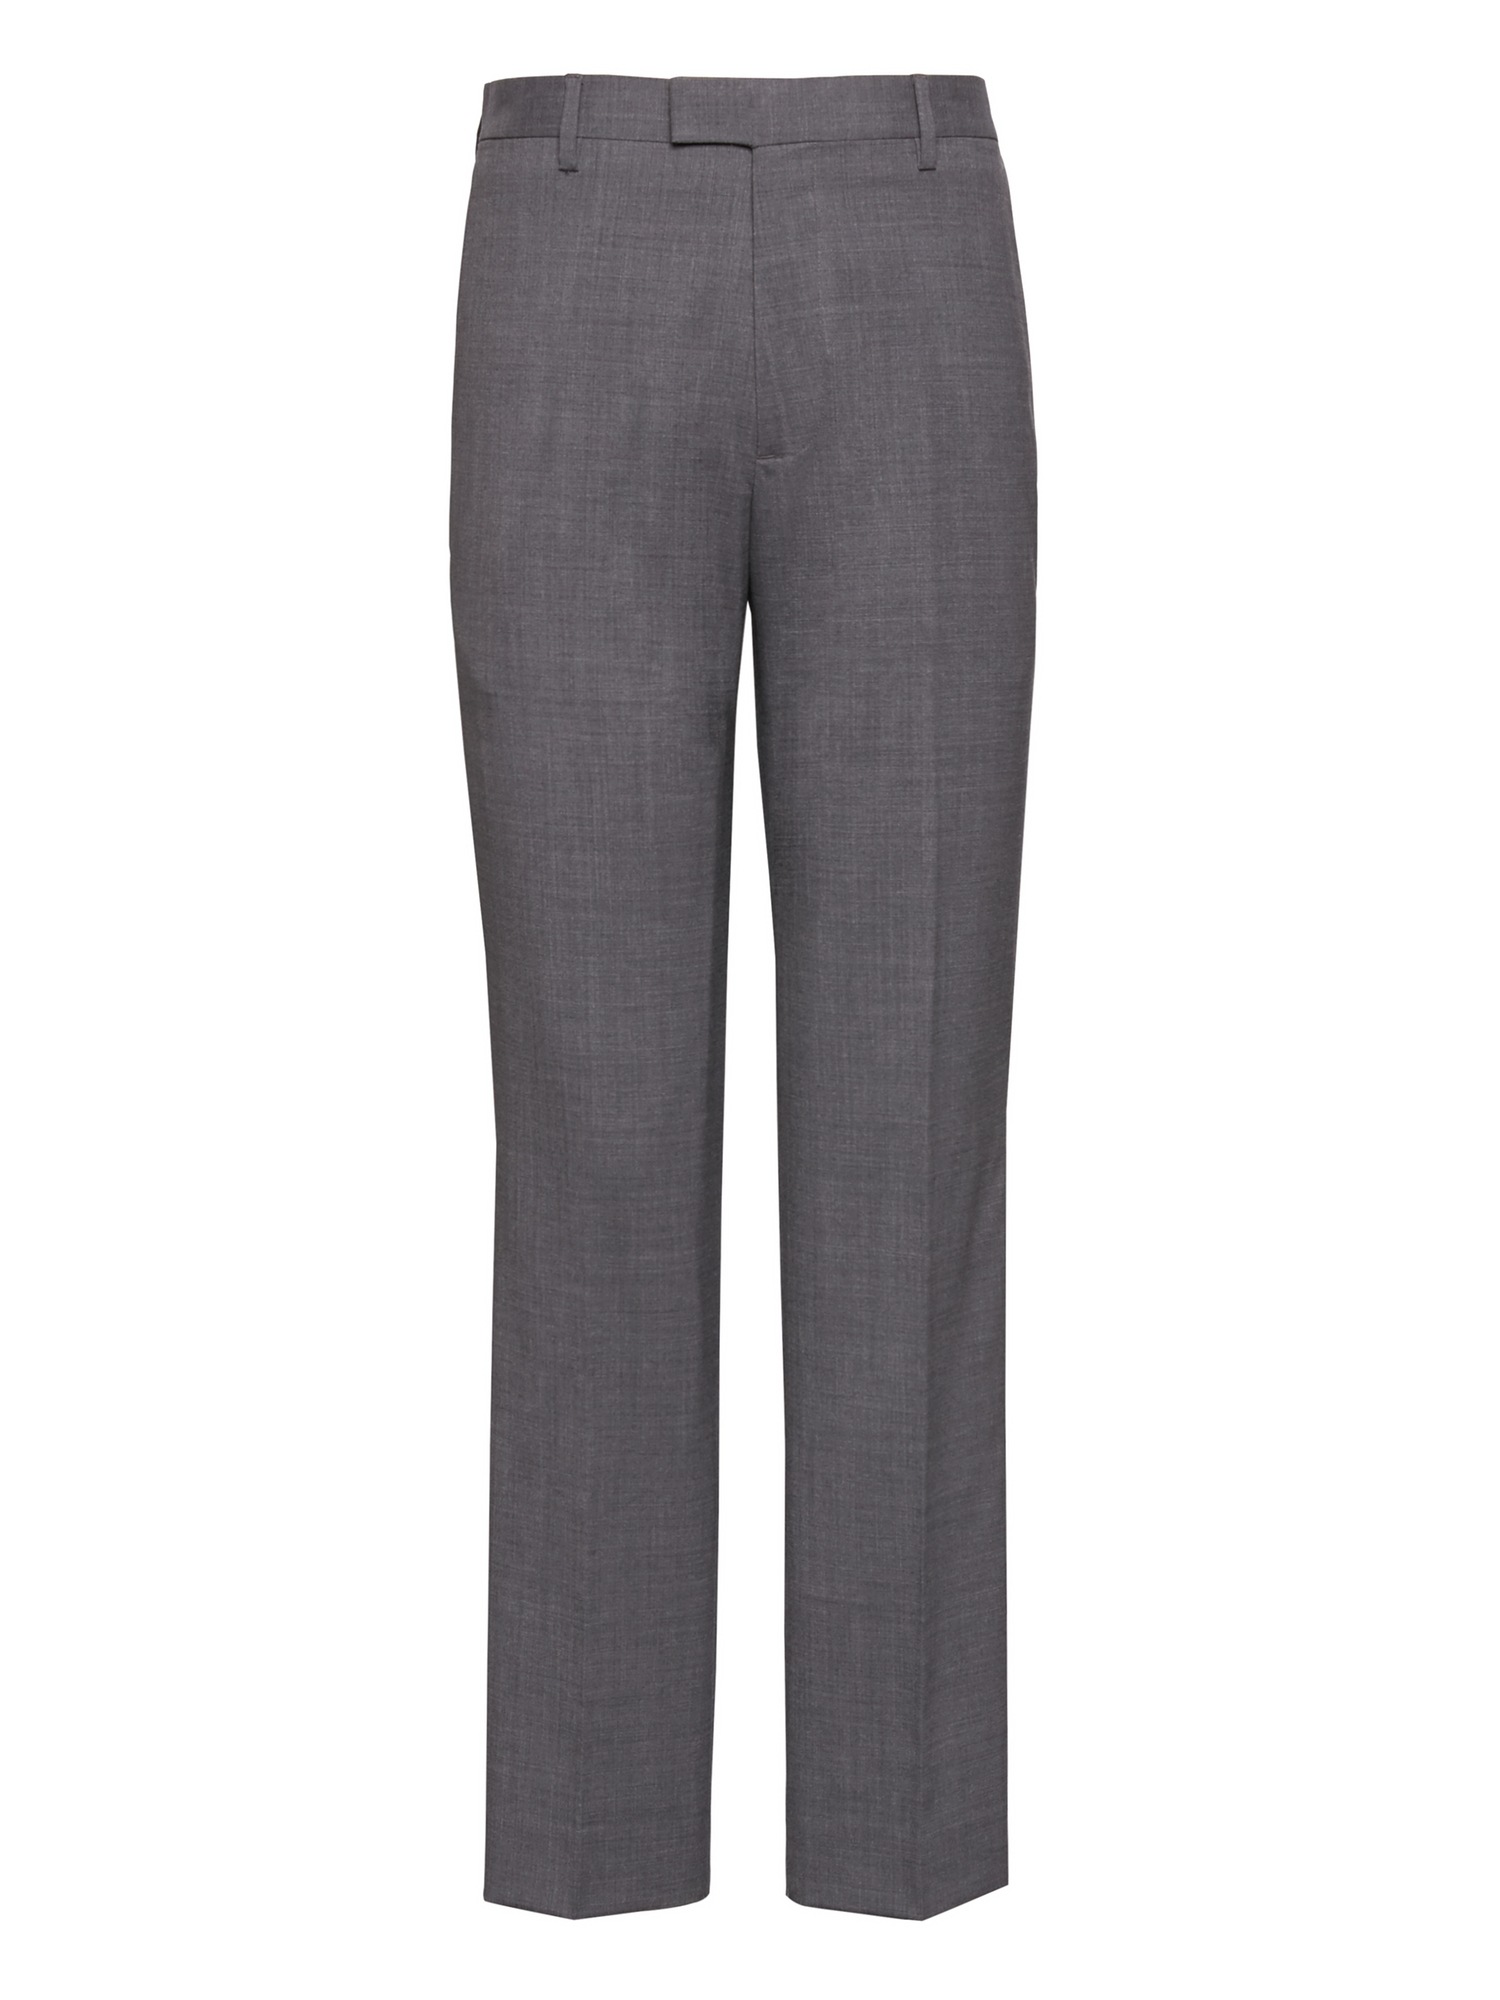 do suit trousers stretch